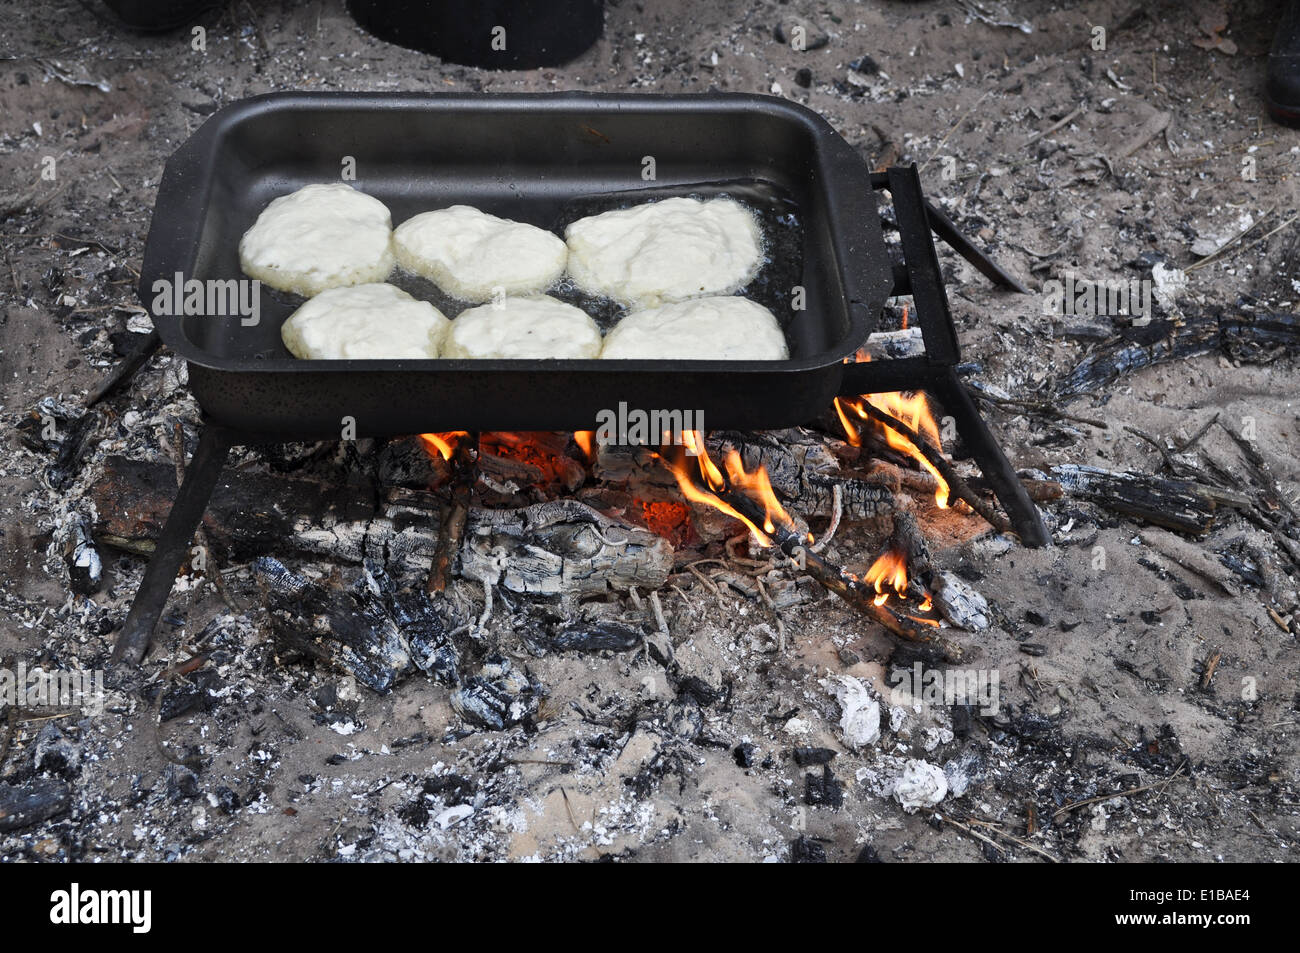 The national Park 'Ryazan Meshera', Russian Federation. Cooking pancakes on a fire in field conditions. Stock Photo